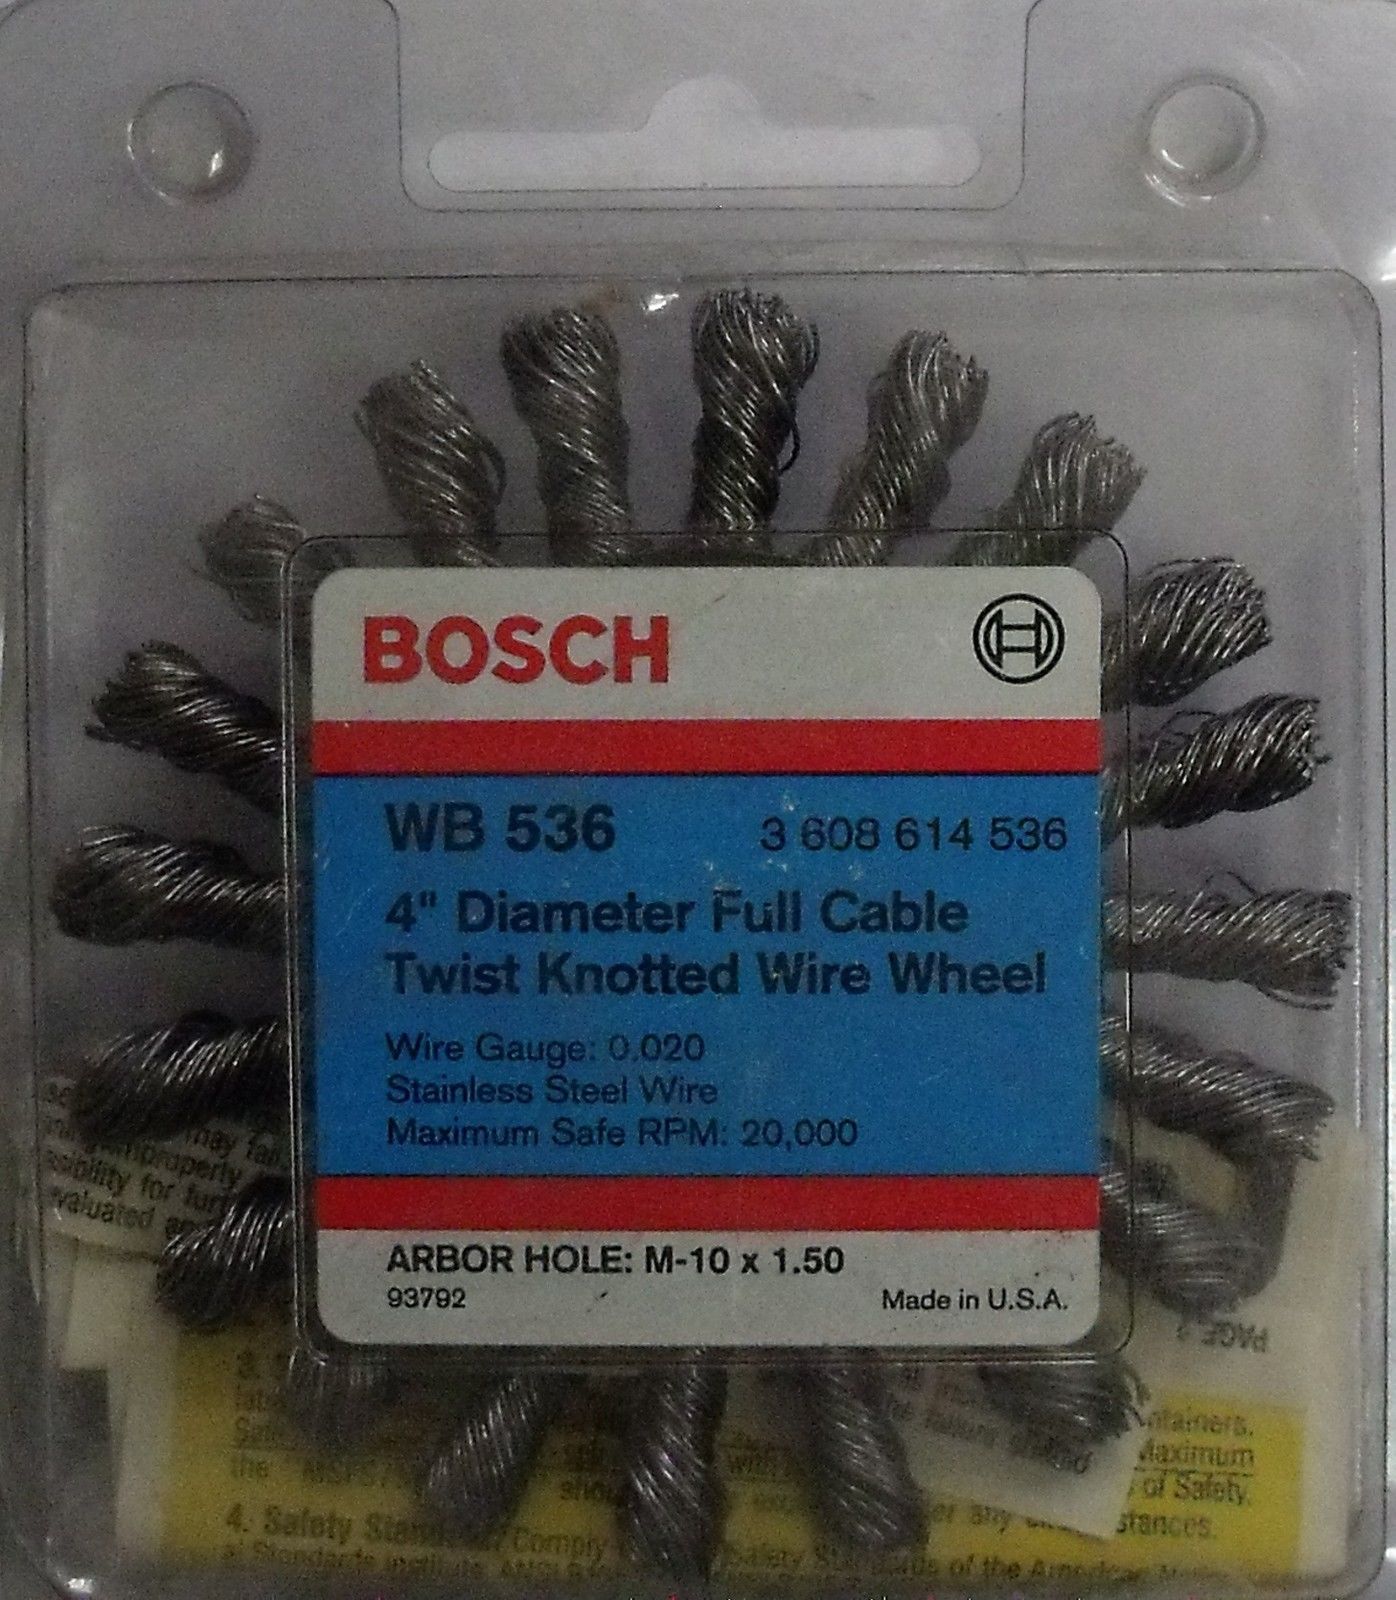 Bosch WB 536 4" Stainless Full Cable Twist Knotted Wire Wheel AR M-10 x 1.50 USA